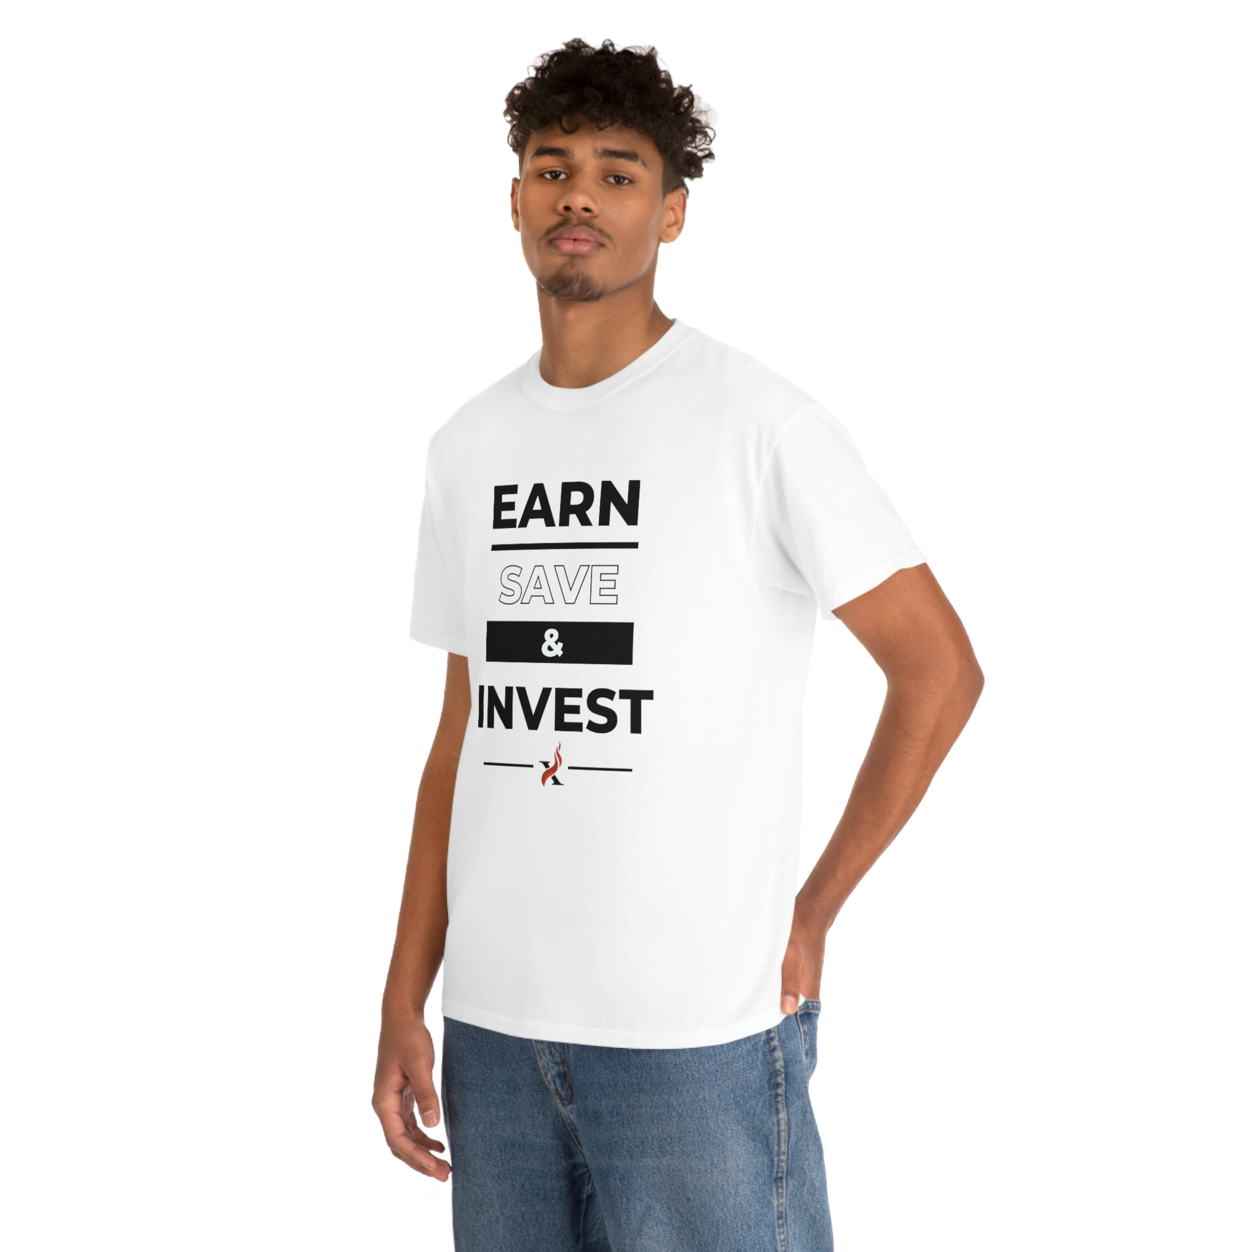 Earn, Save & Invest - Unisex Softstyle T-Shirt